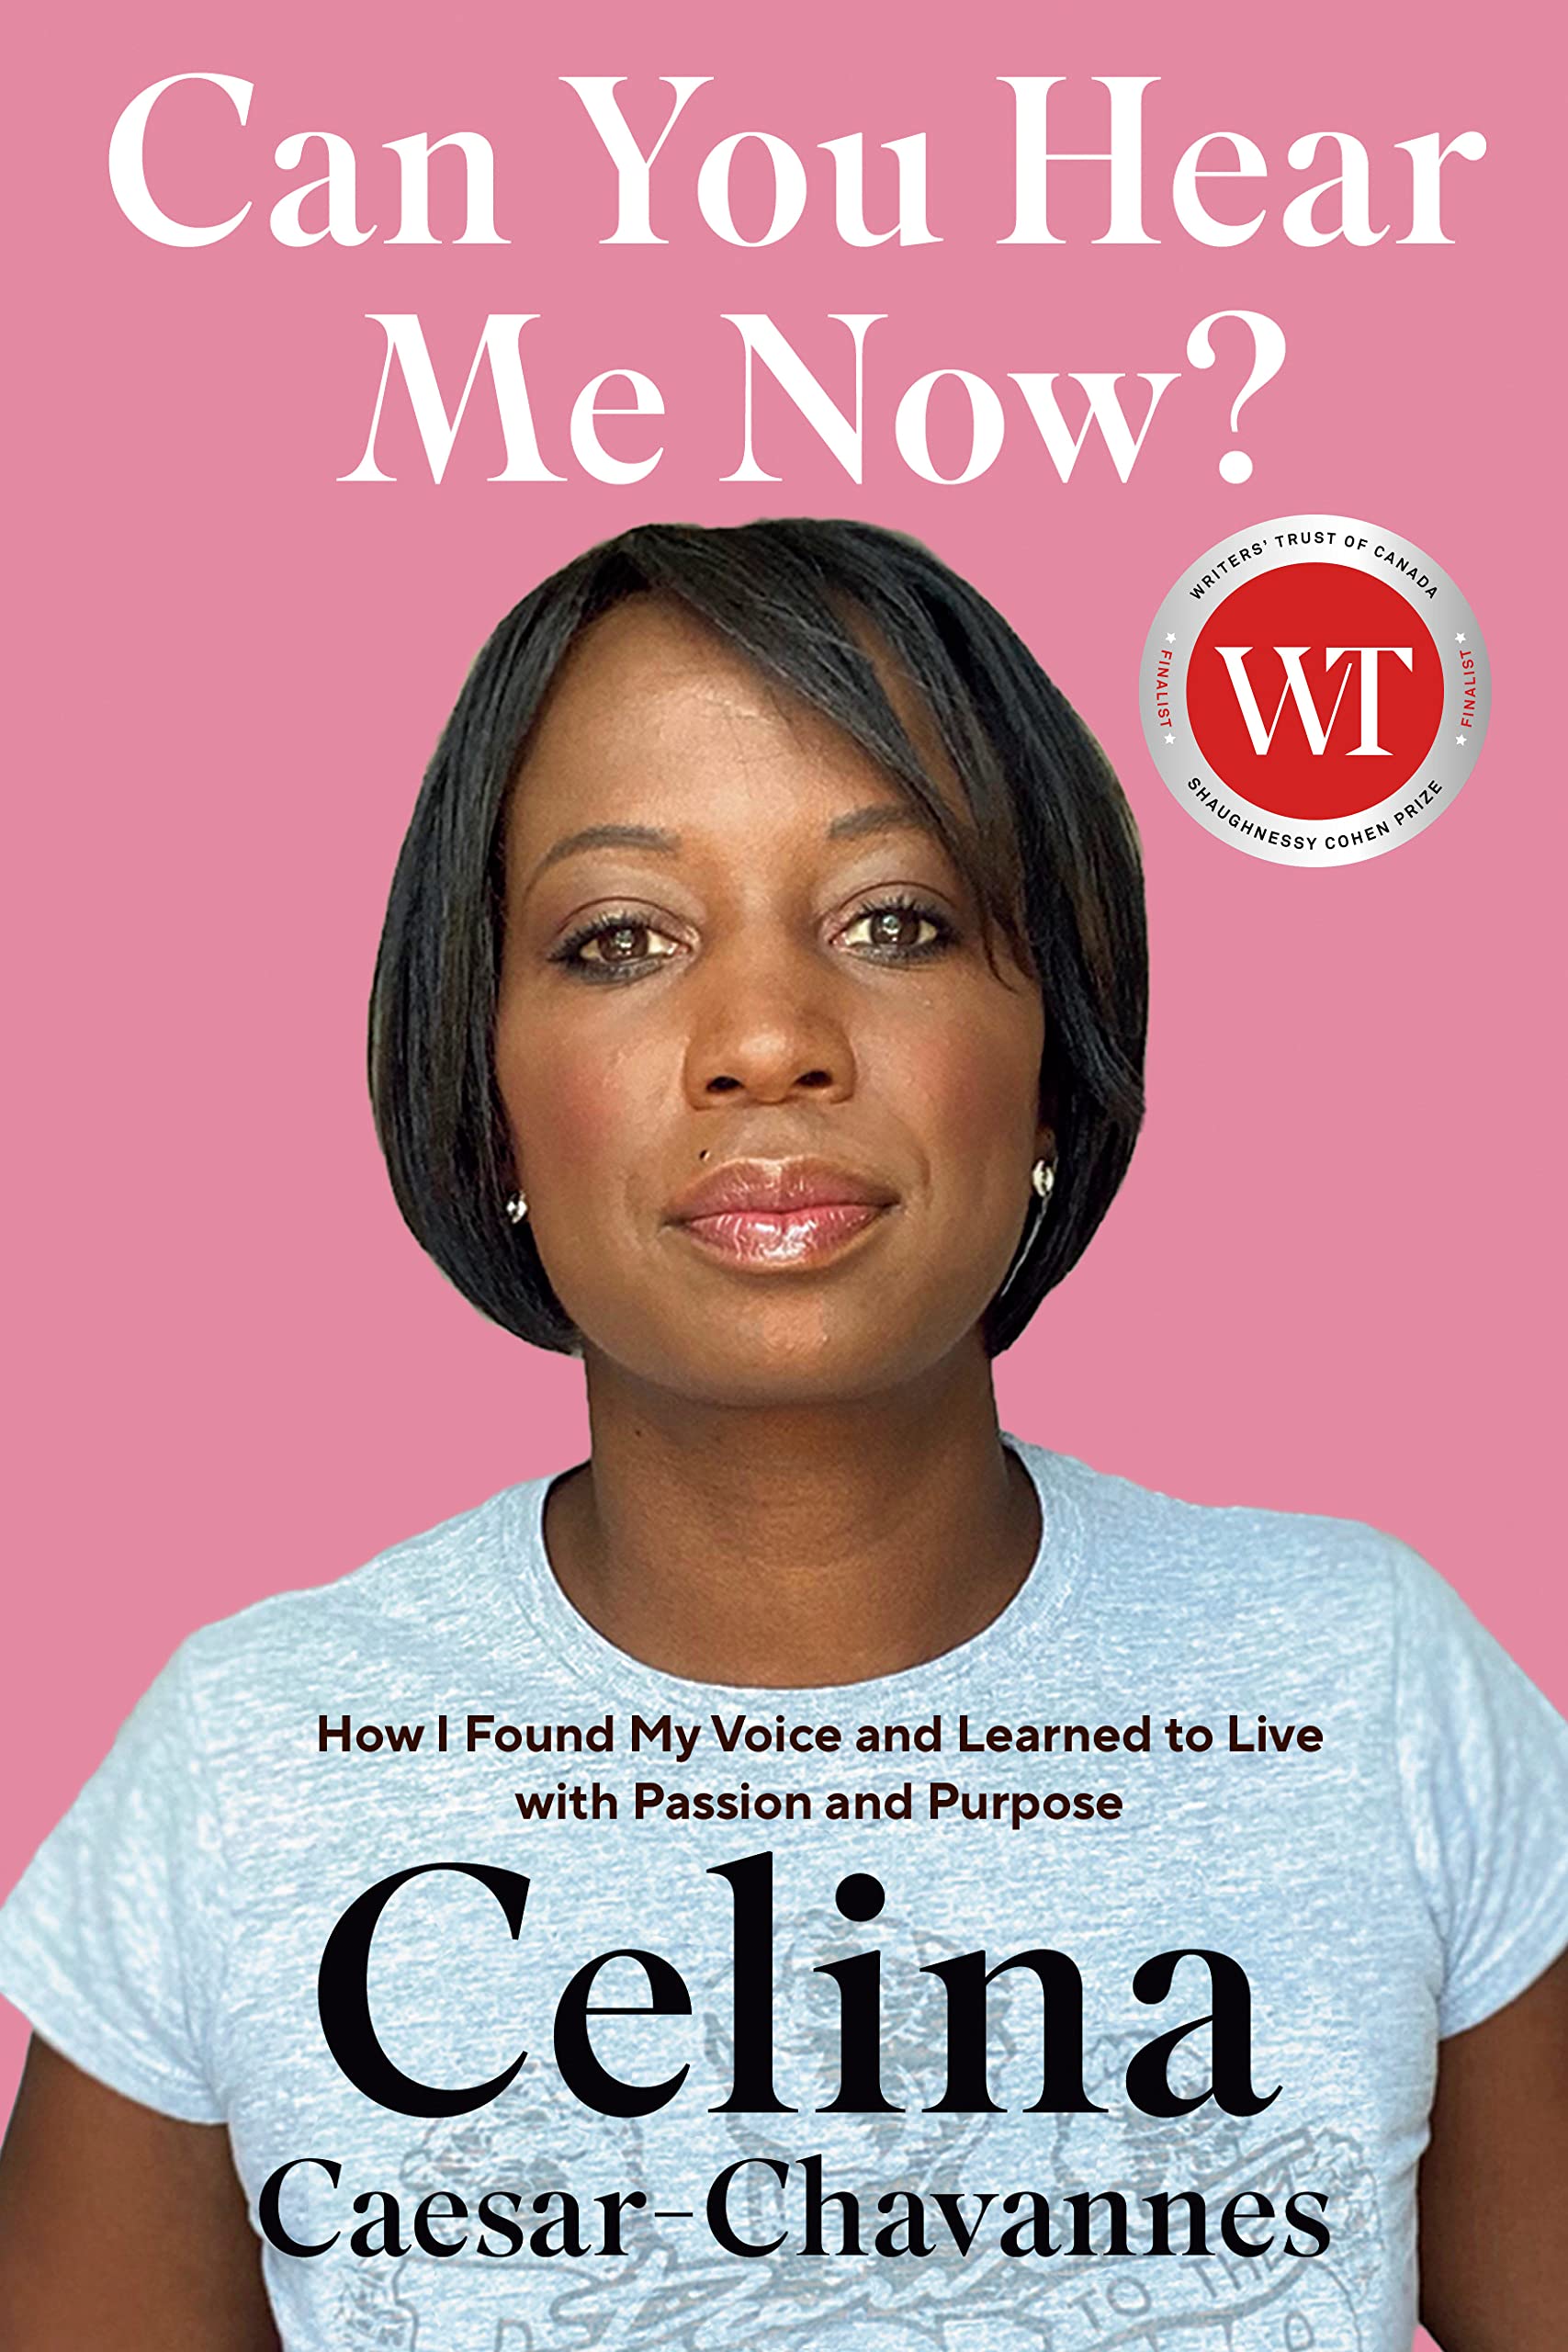 Can You Hear Me Now?: How I Found My Voice and Learned to Live with Passion and Purpose Hardcover by Celina Caesar-Chavannes